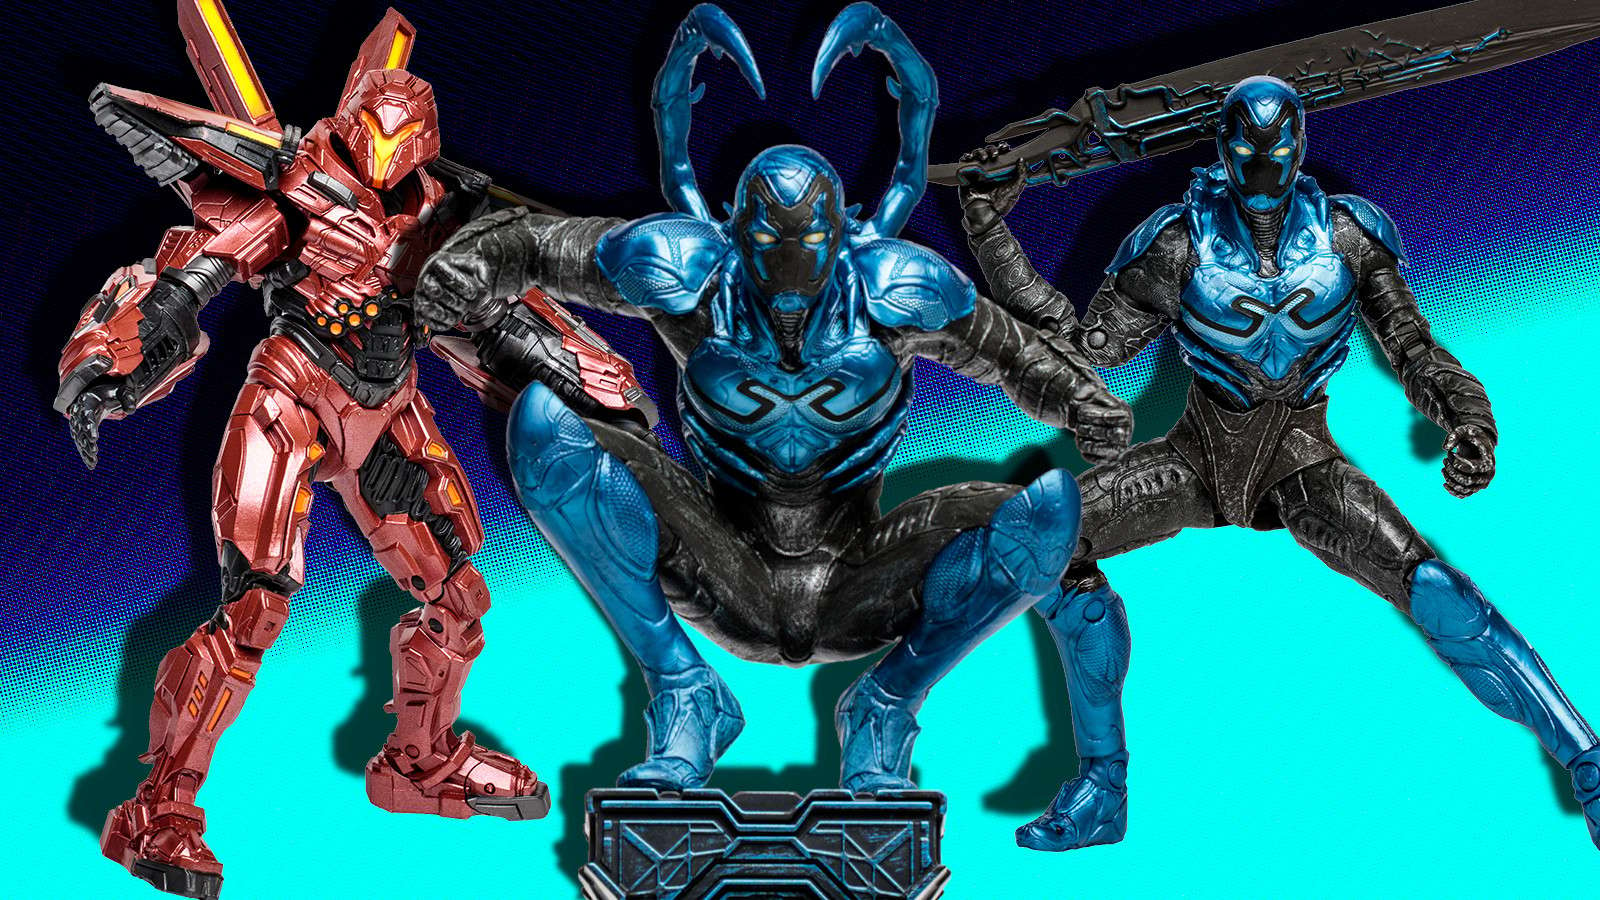 A collage of Blue Beetle figures from DC Multiverse.